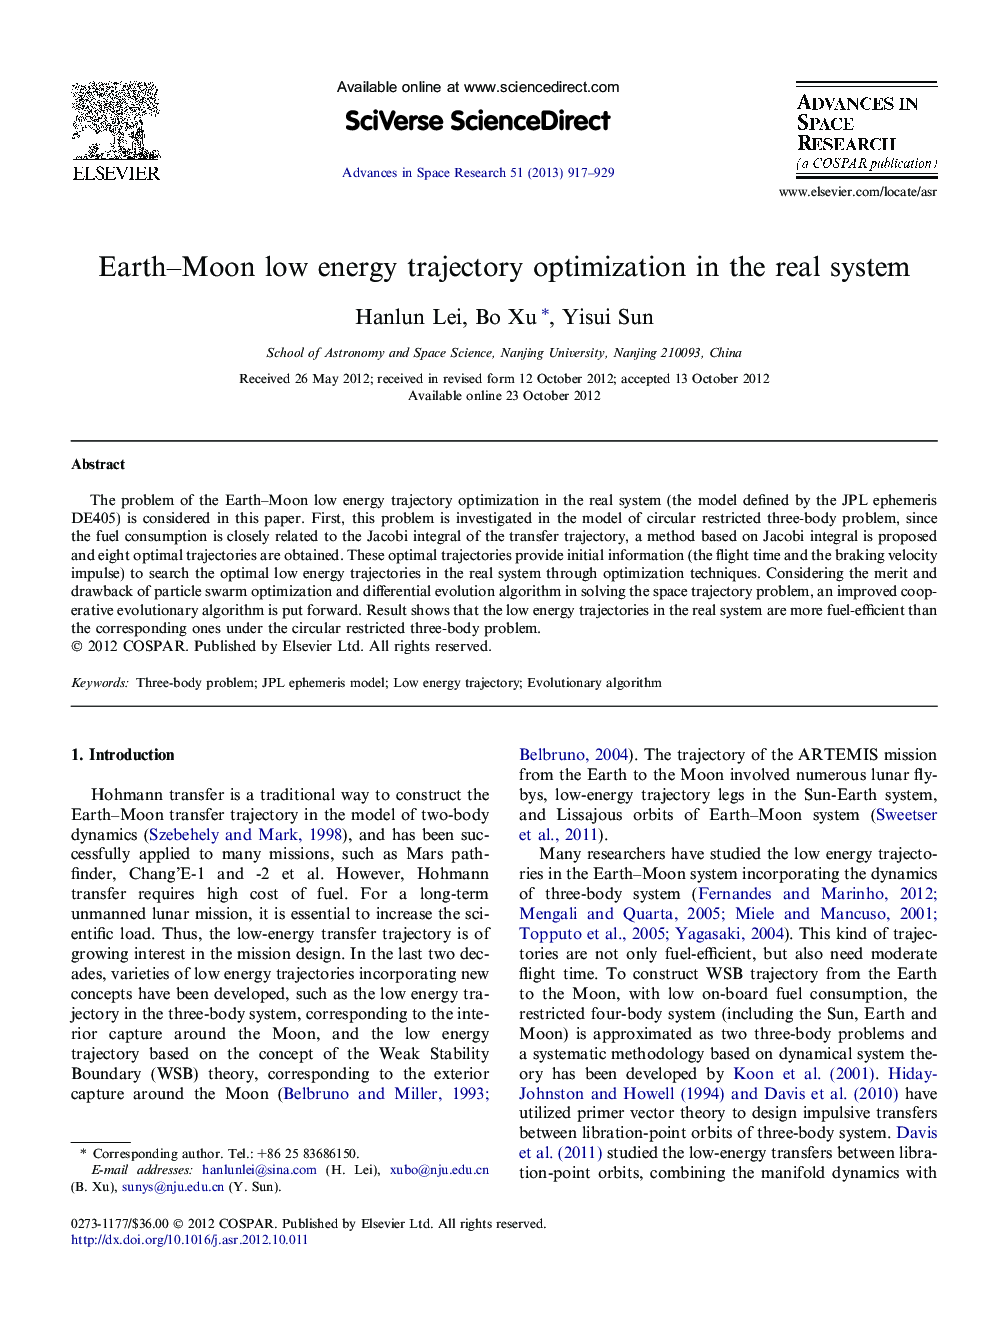 Earth-Moon low energy trajectory optimization in the real system